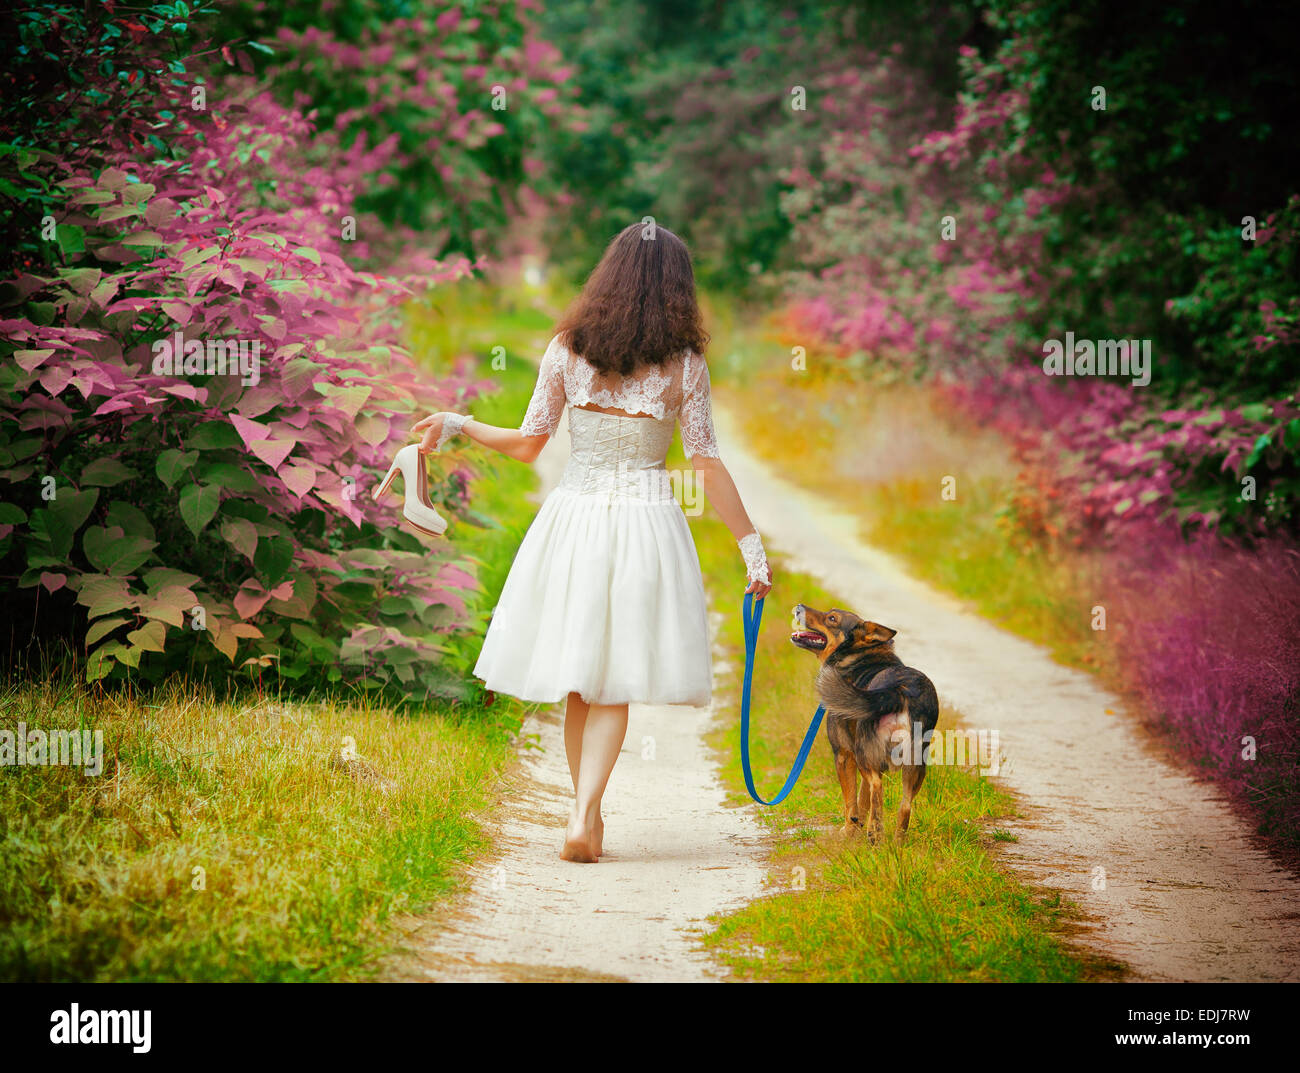 Young bride wearing wedding dress walking barefoot with dog on rural road back to camera. Woman bring wedding shoes. Stock Photo